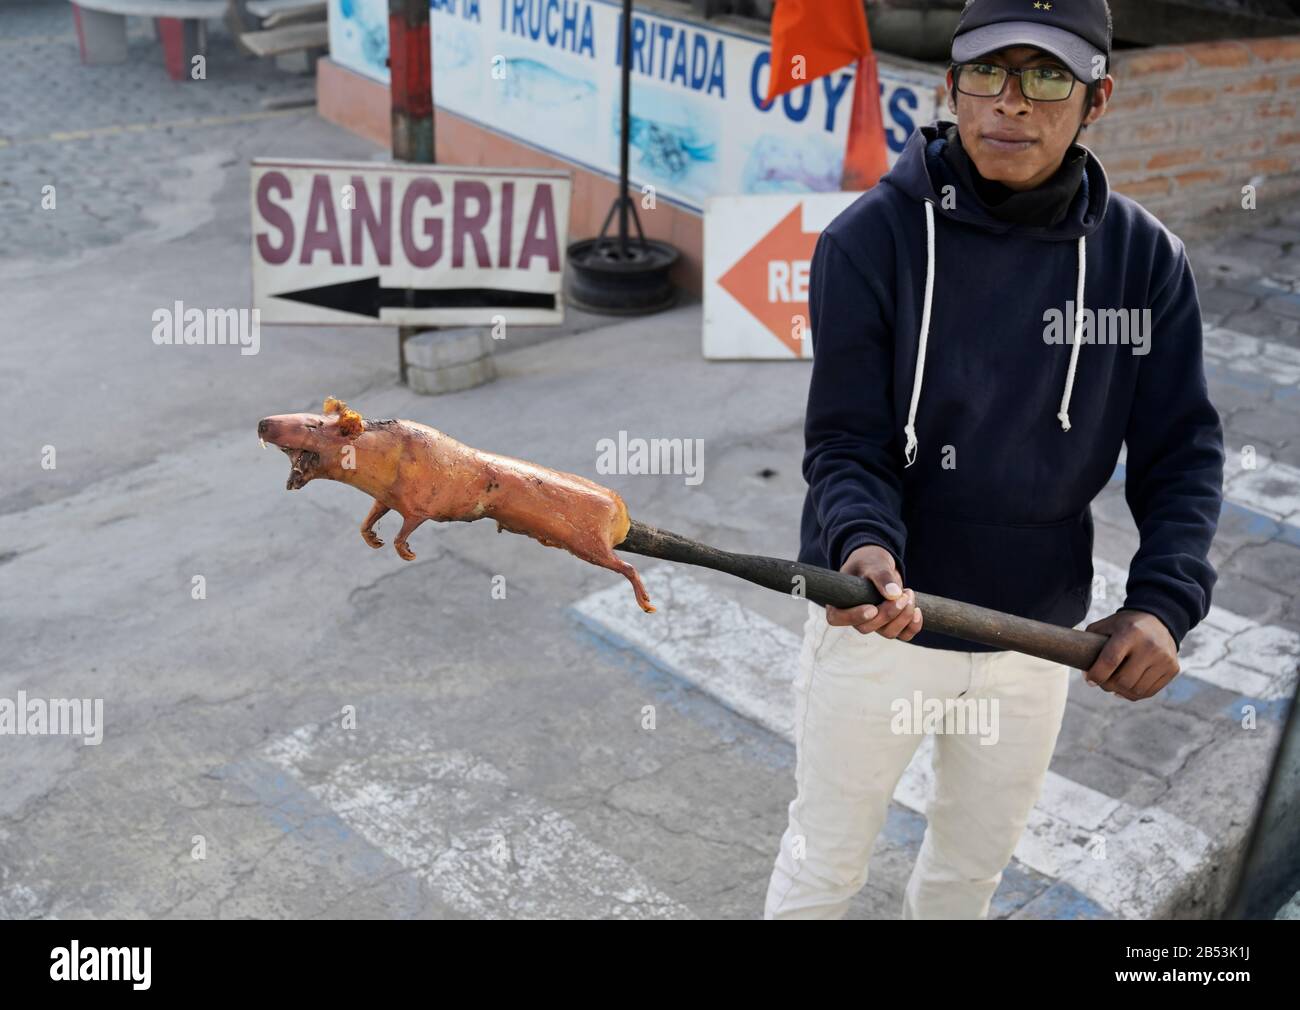 Cuy, guinea pig, roasted for food for sale Quito Ecuador Stock Photo